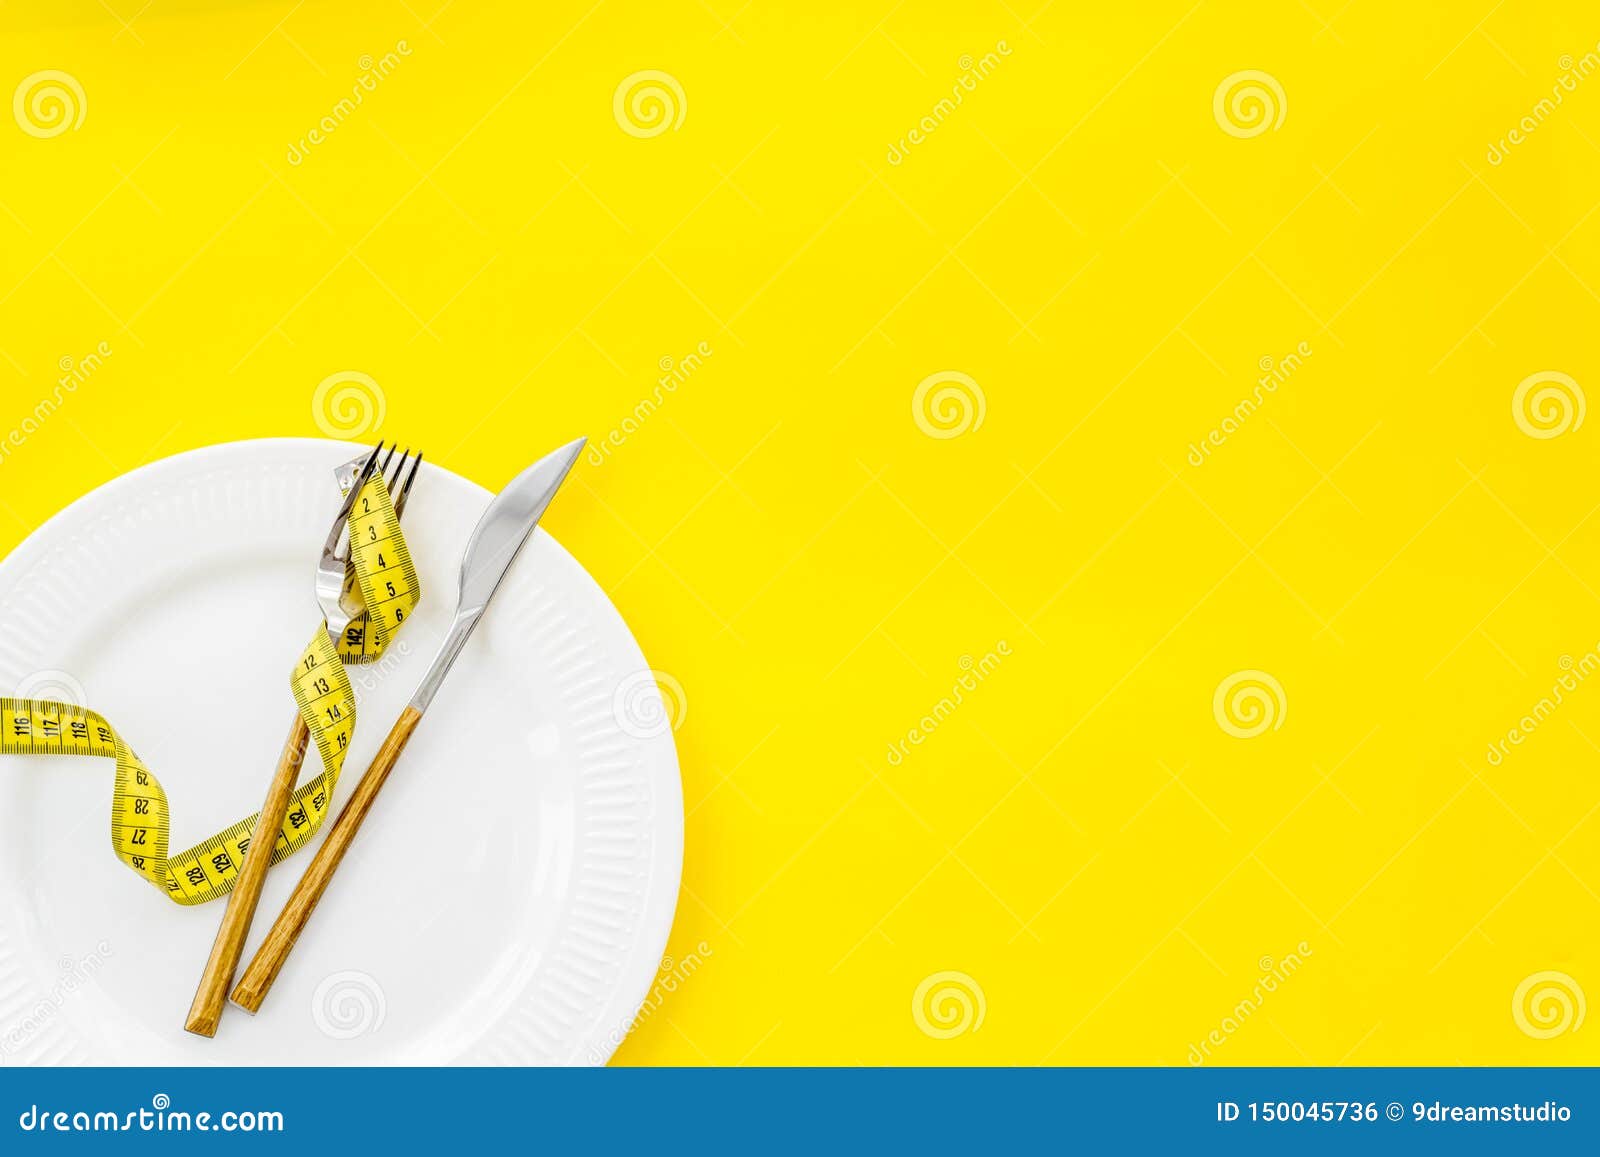 Download Slim Concept With Plate, Flatware And Measuring Tape On Yellow Background Top View Mockup Stock ...